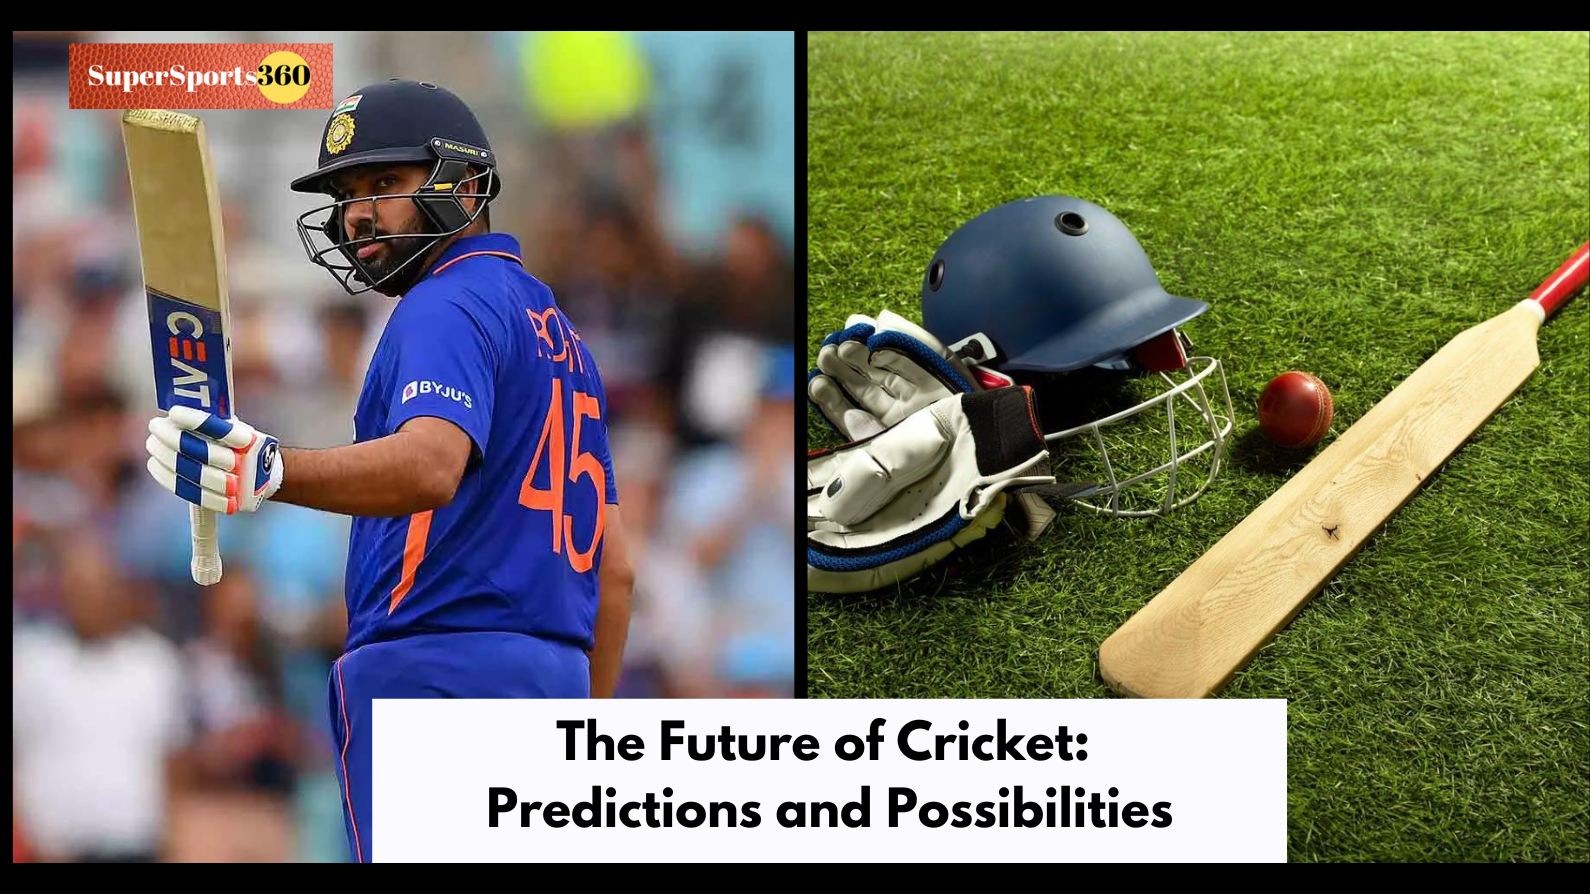 The Future of Cricket: Predictions and Possibilities